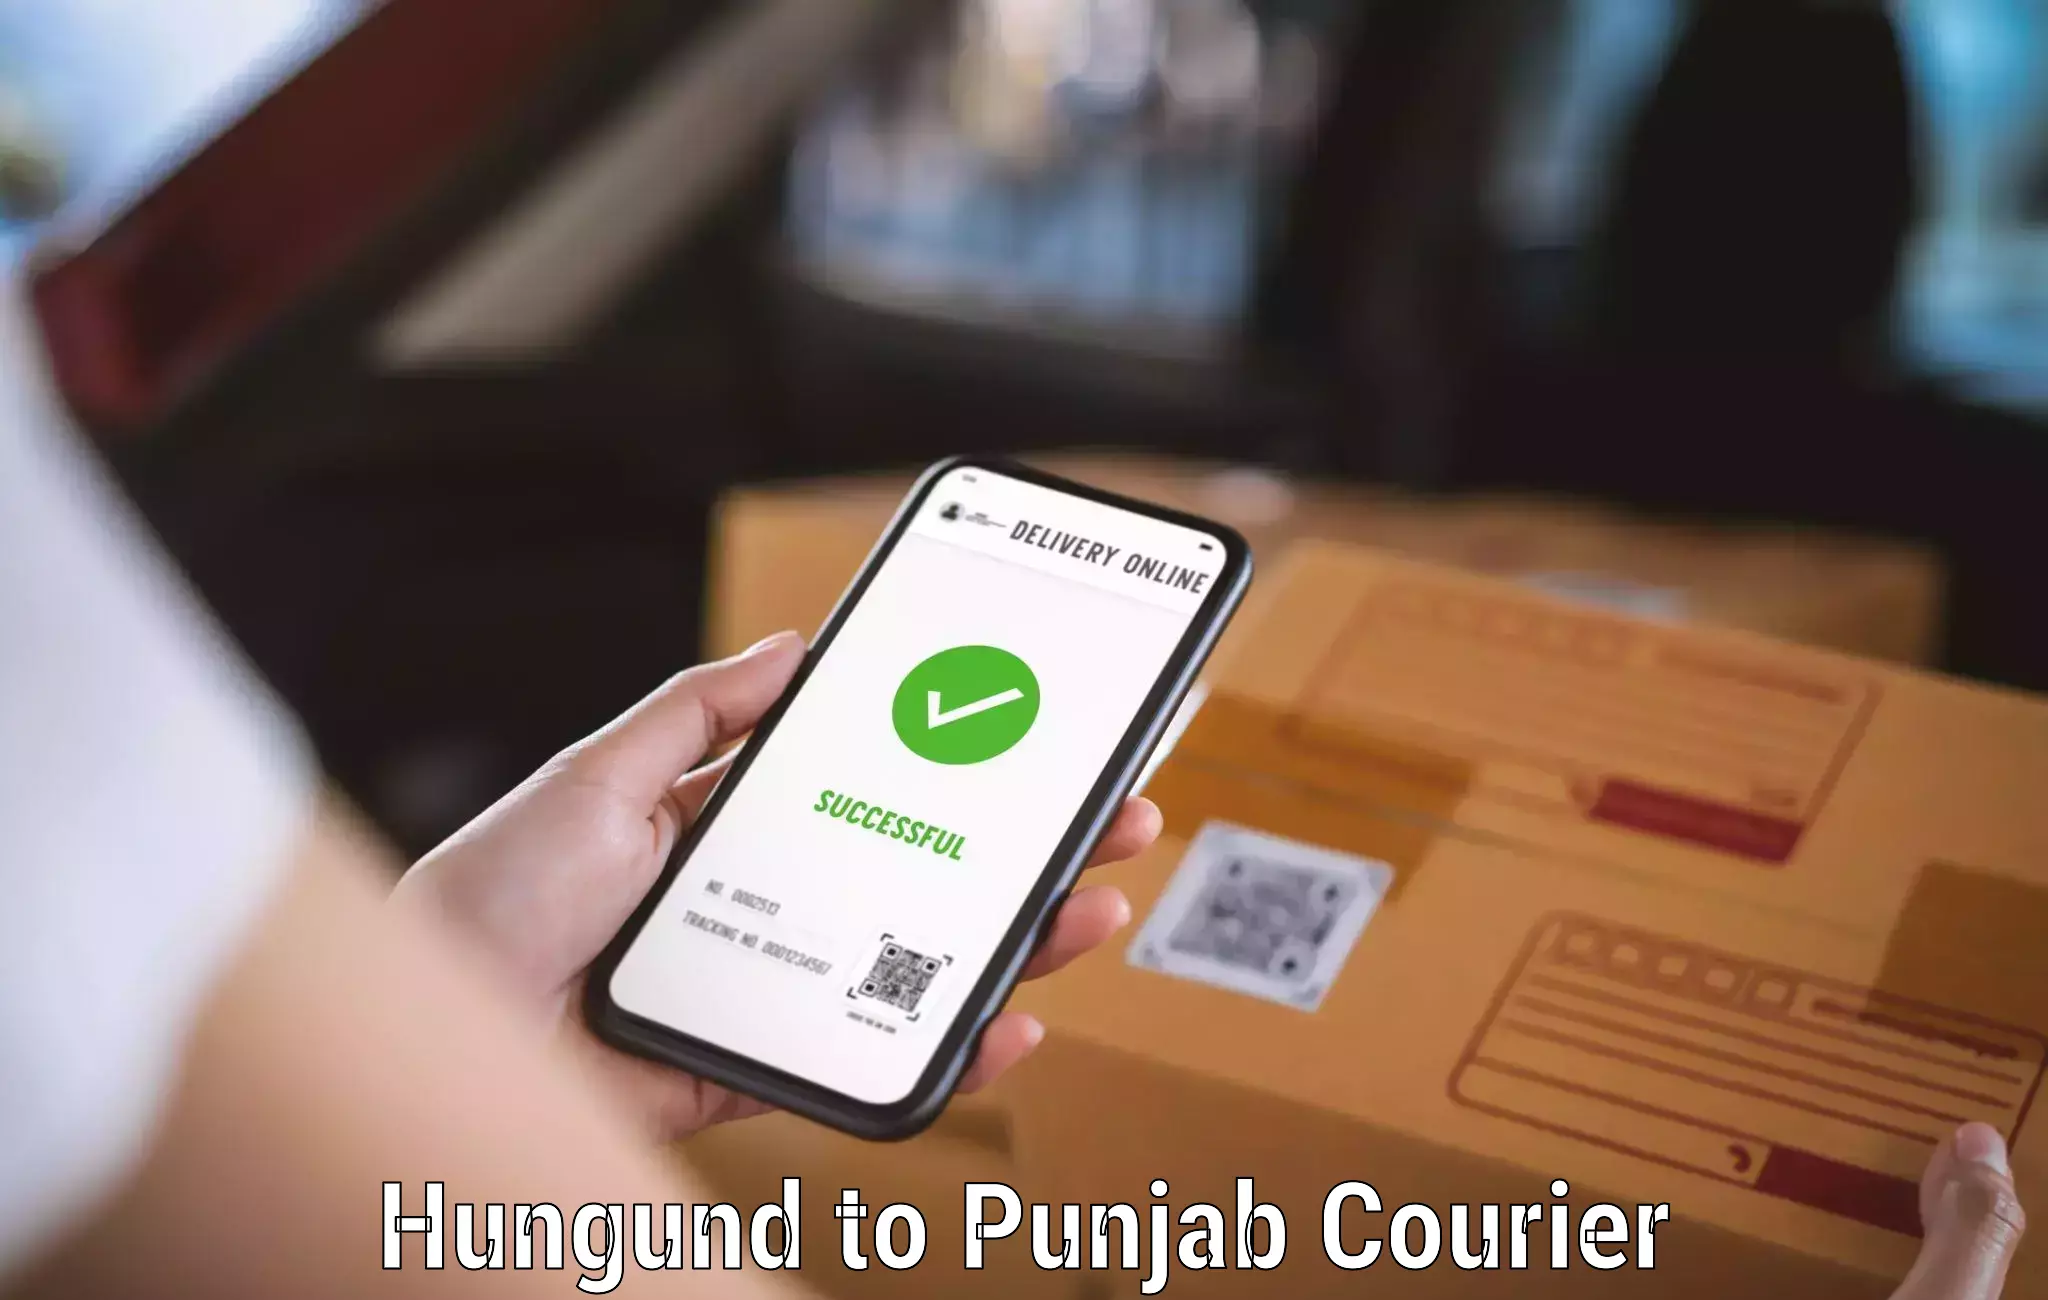 Courier service booking Hungund to Punjab